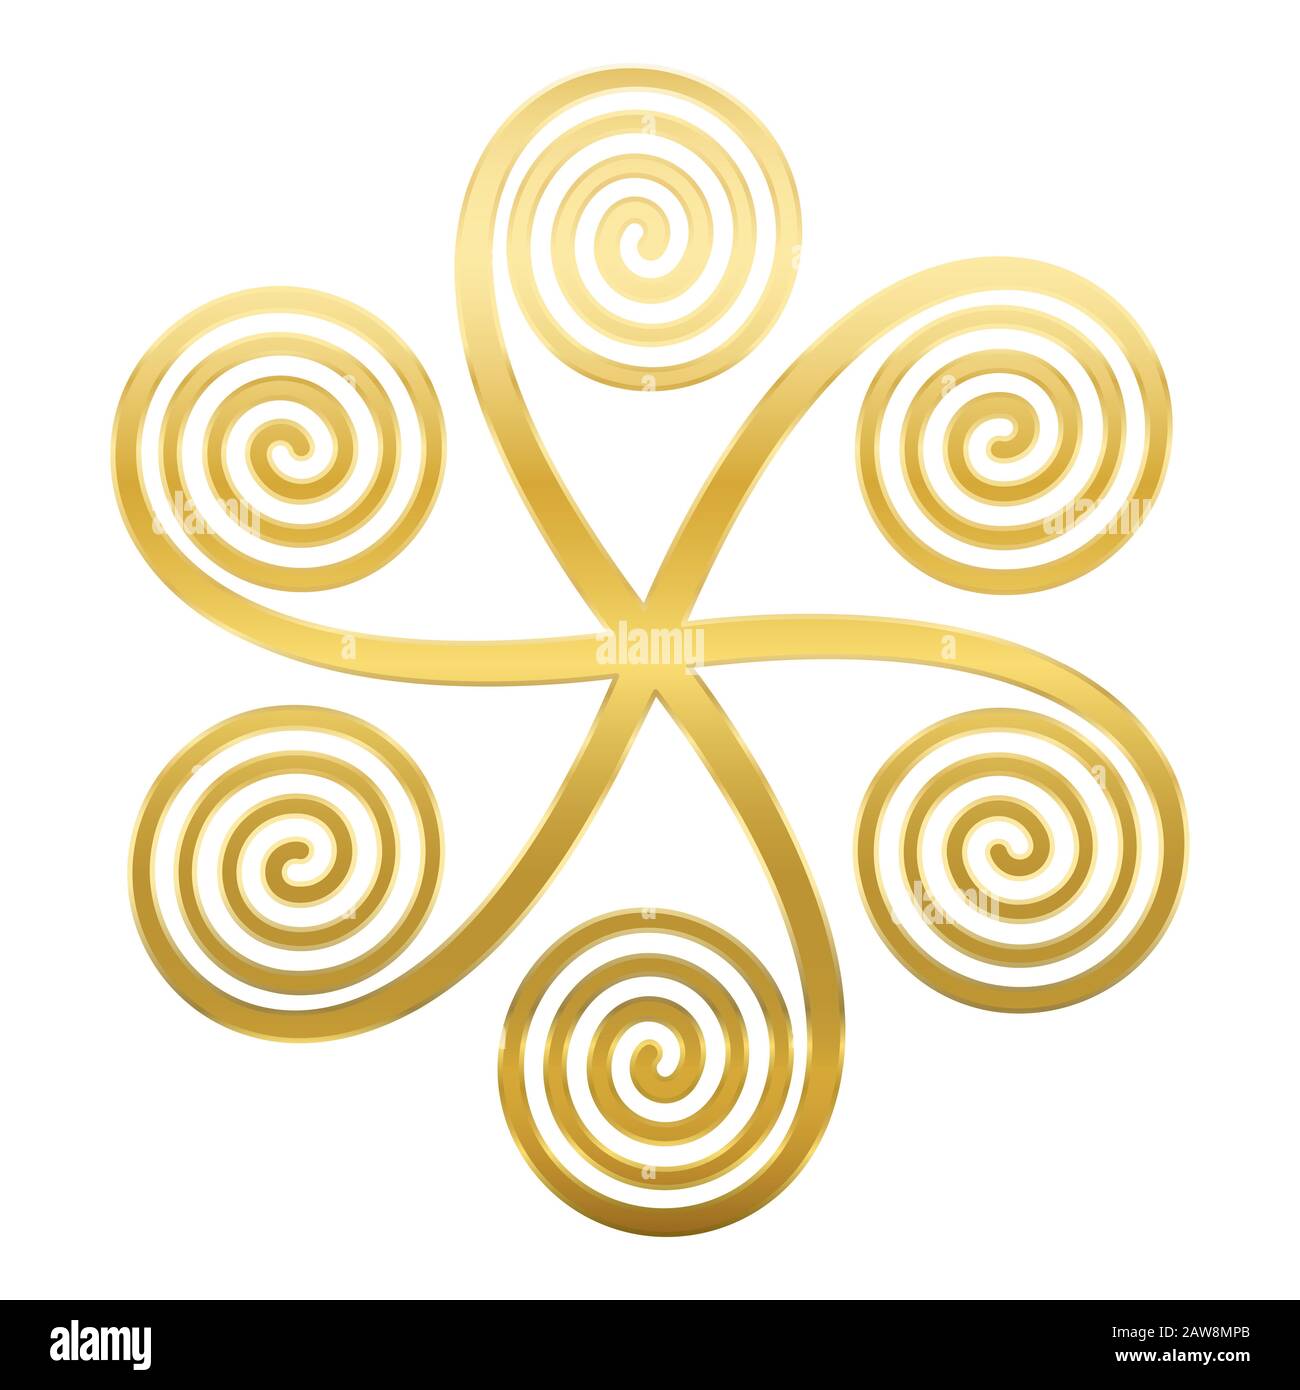 Golden star shaped symbol with six linear arithmetic spirals, made of Archimedean spirals, connected in a centre, appearing to rotate clockwise. Stock Photo